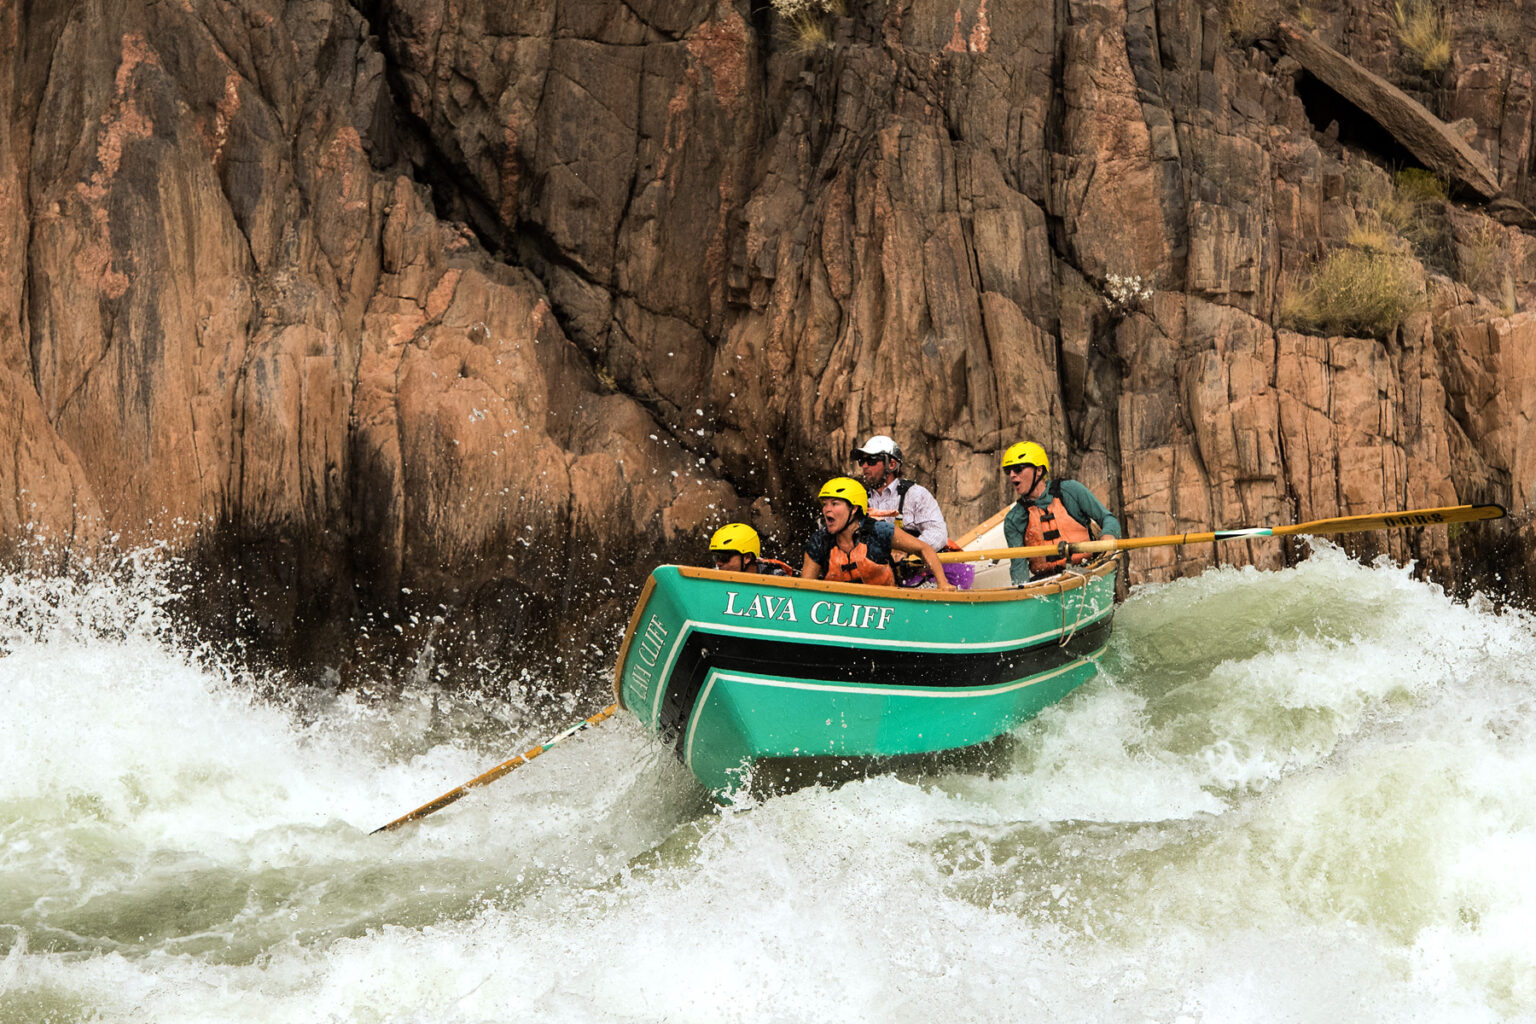 OARS guide steers a wooden dory through rough whitewater in Grand Canyon while three guests in yellow helmets hang on tight